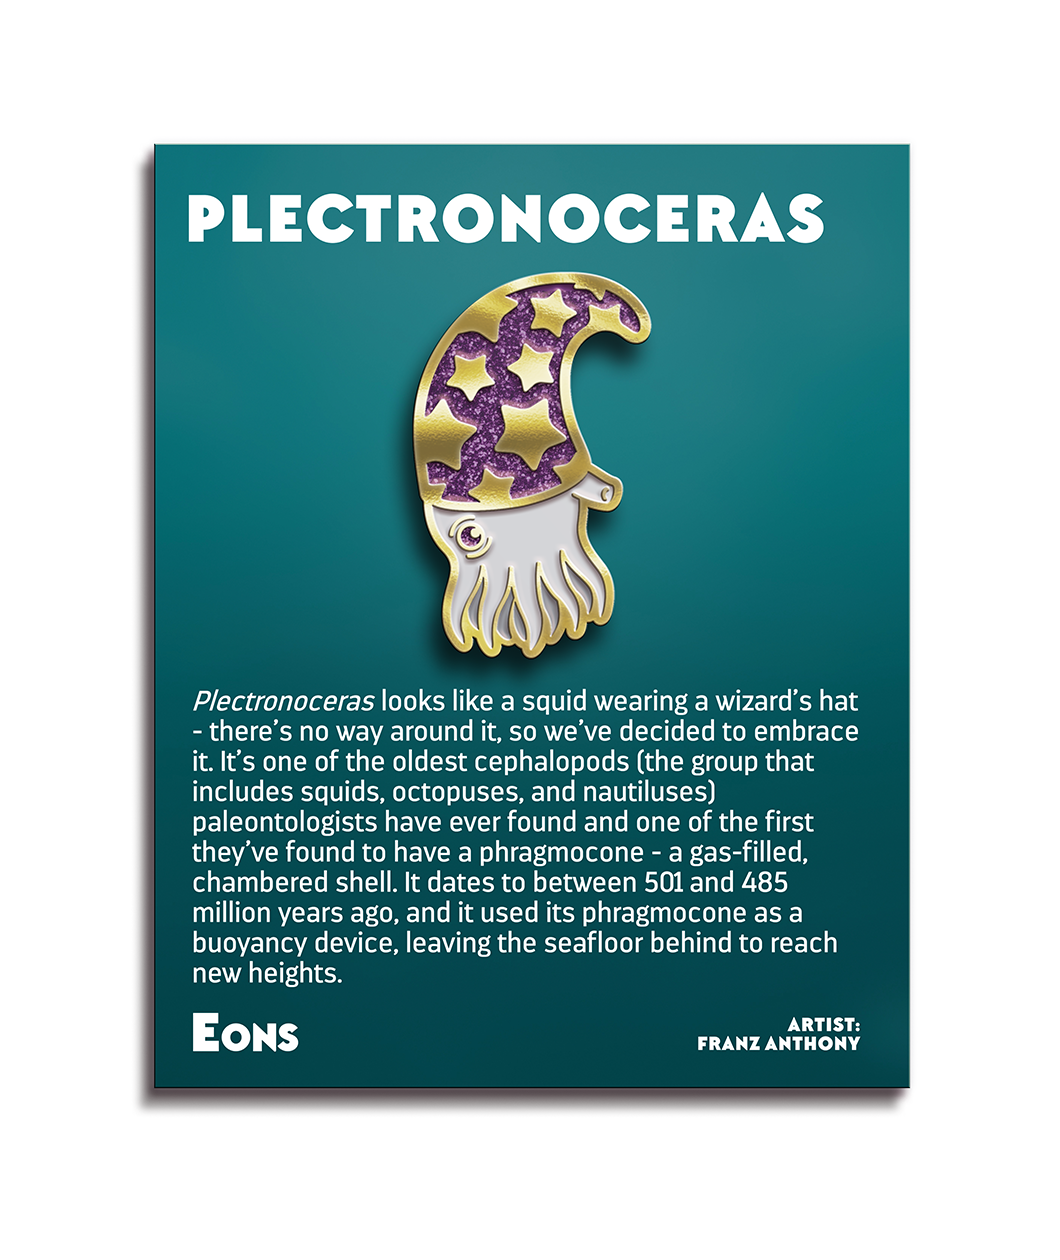 Cartoon representation of yellow plectronoceras with a gold outline wearing a purple wizard hat with gold stars. Pin is attached to blue information card about the plectronoceras - from Eons